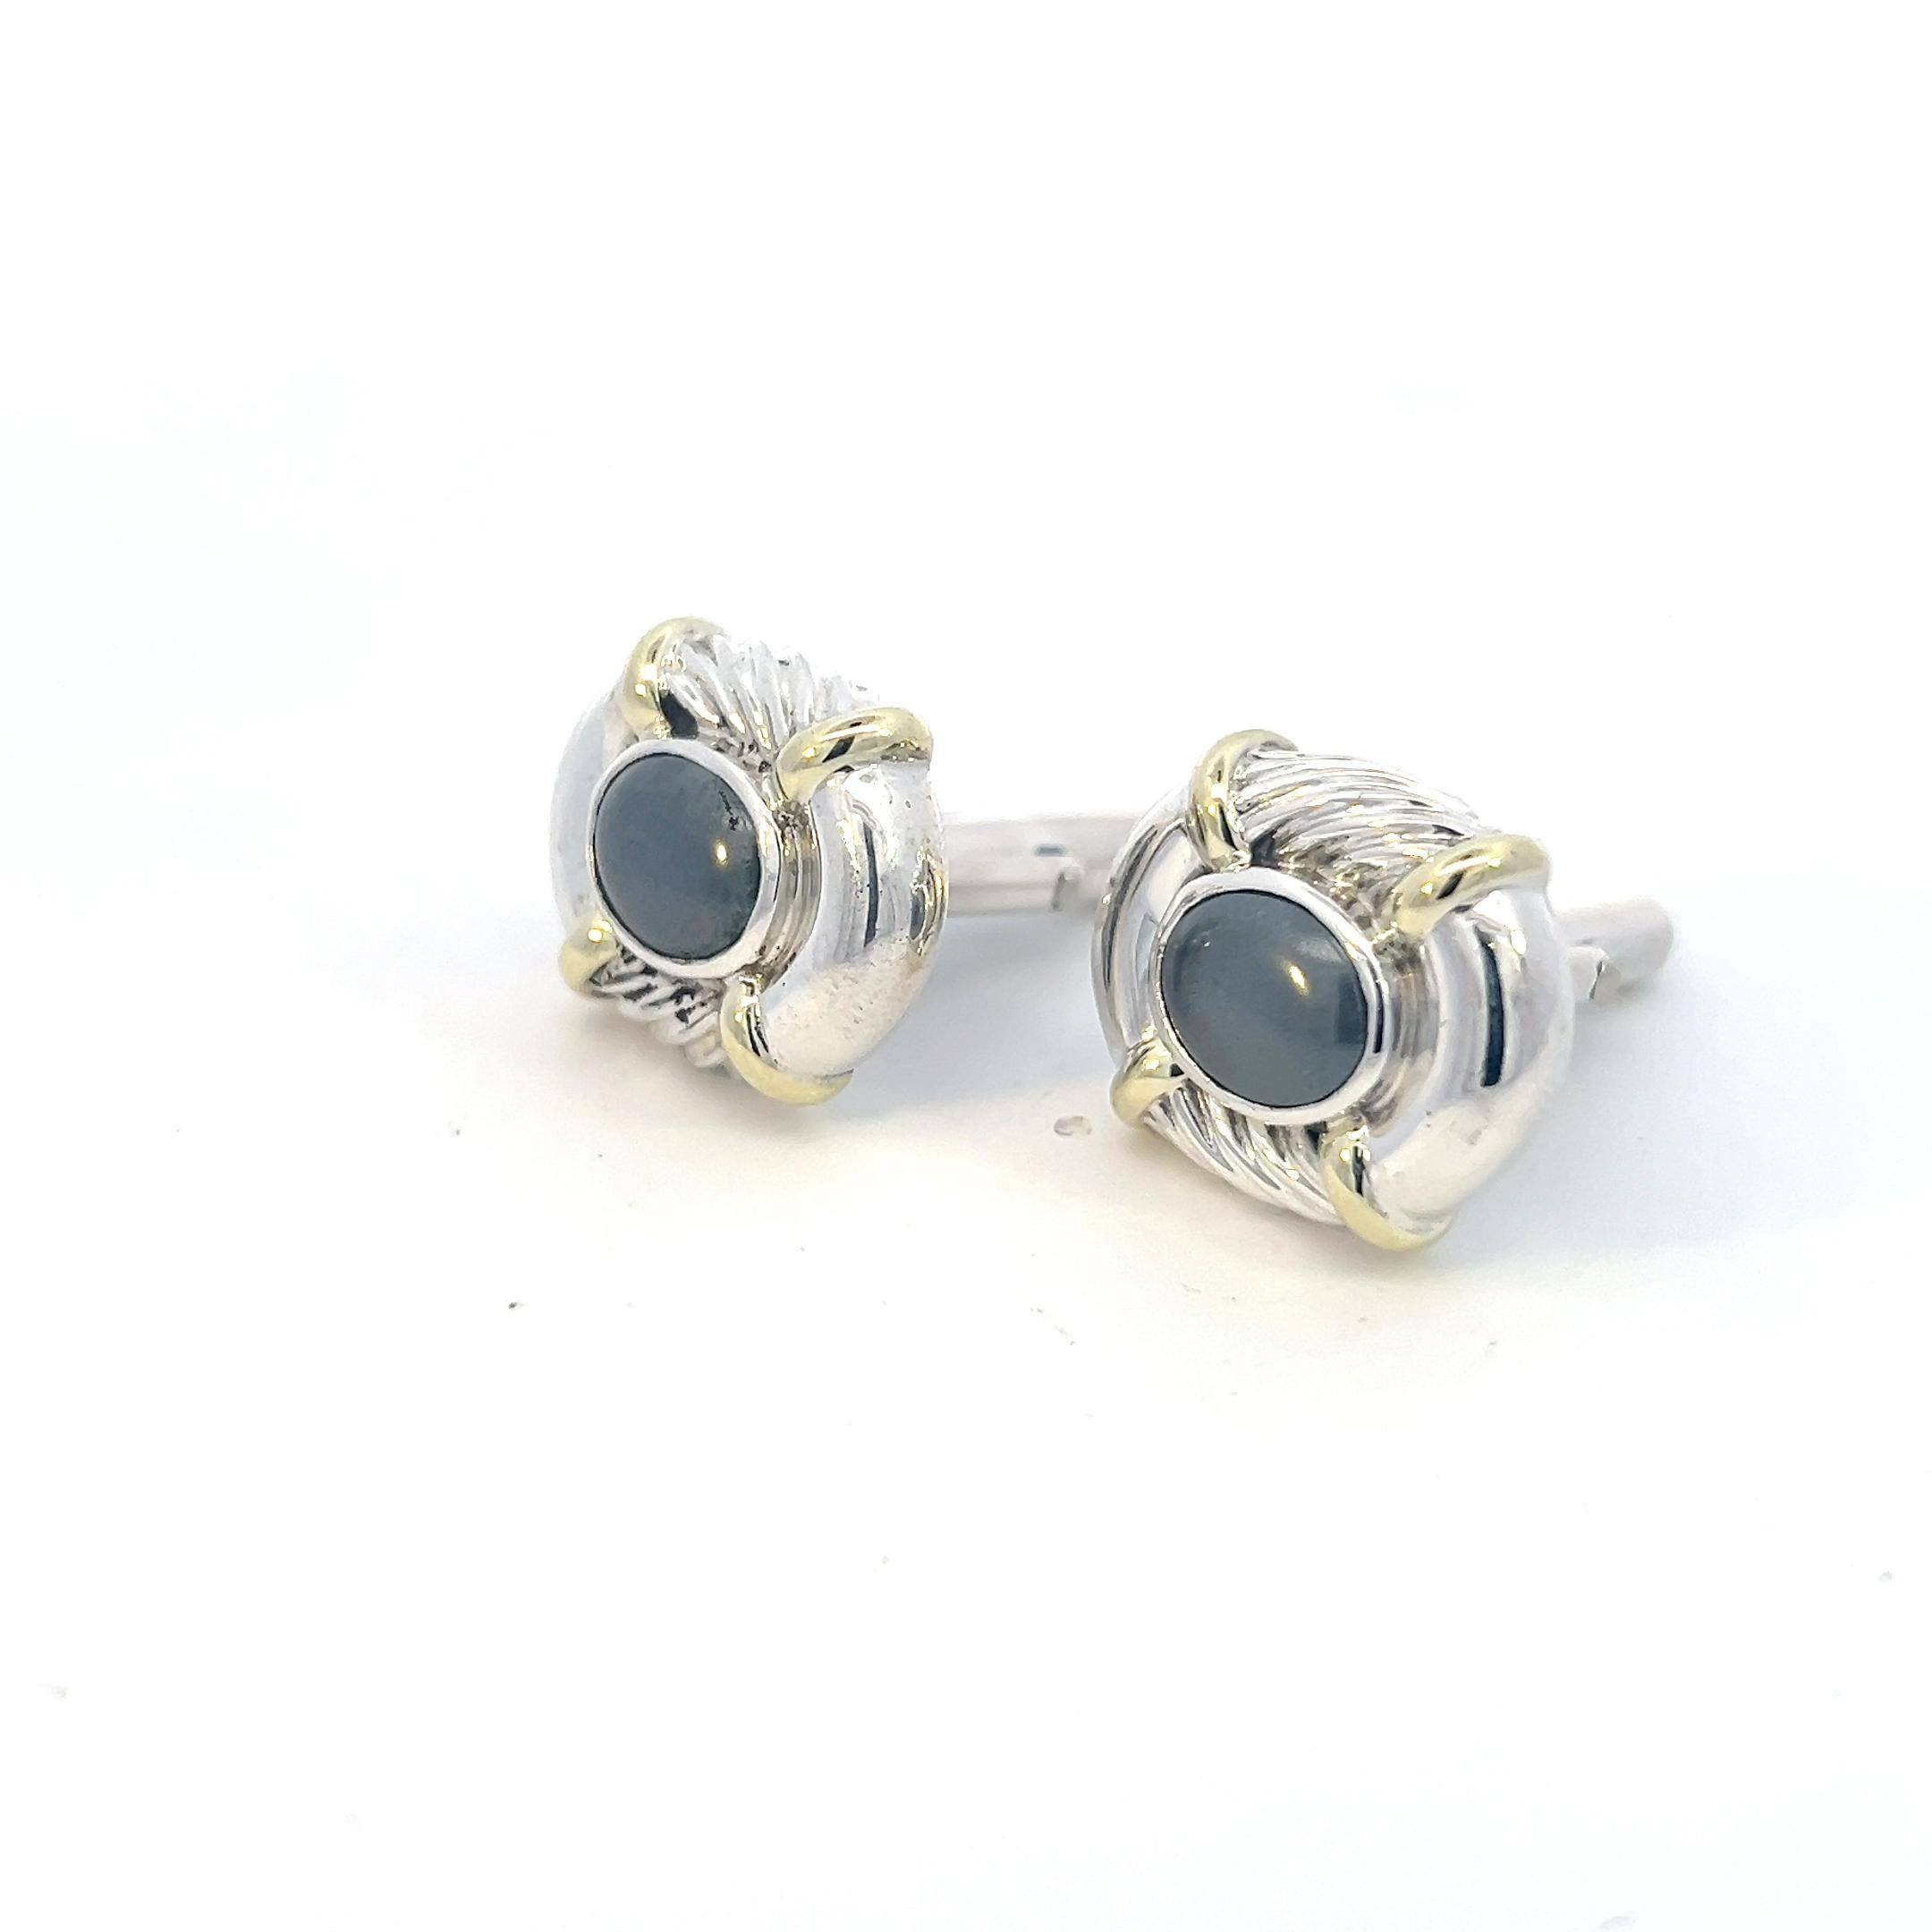 Authentic David Yurman Estate Hematite Cufflinks 14k Gold & Silver 17 Grams DY418

Retail: $999.00

TRUSTED SELLER SINCE 2002

PLEASE SEE OUR HUNDREDS OF POSITIVE FEEDBACKS FROM OUR CLIENTS!!

FREE SHIPPING

Details
Cufflinks: Hematite